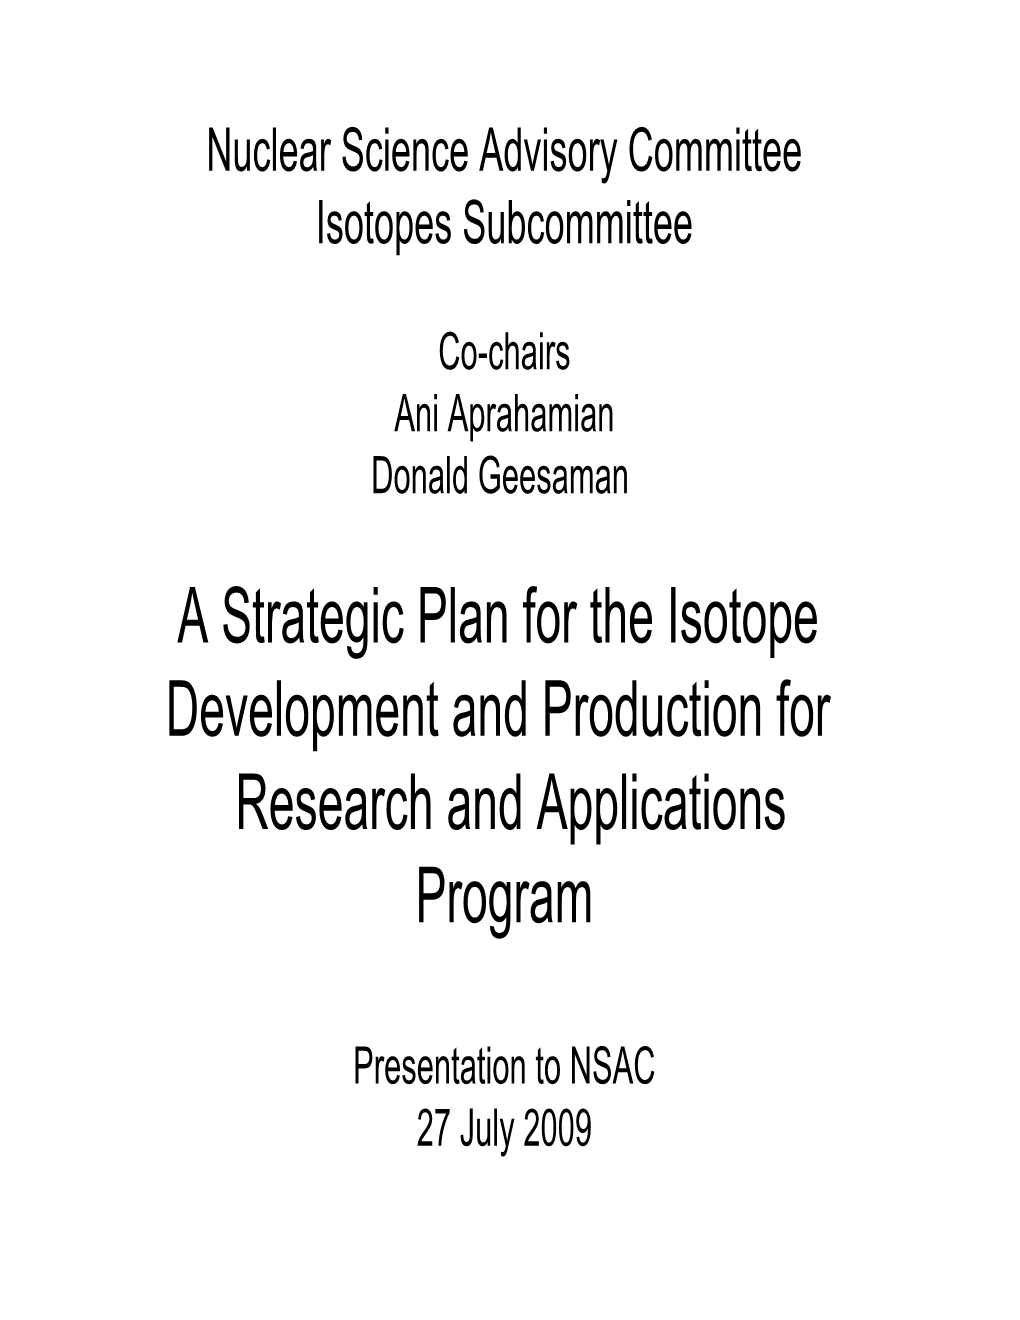 A Strategic Plan for the Isotope Development and Production for Research and Applications Program